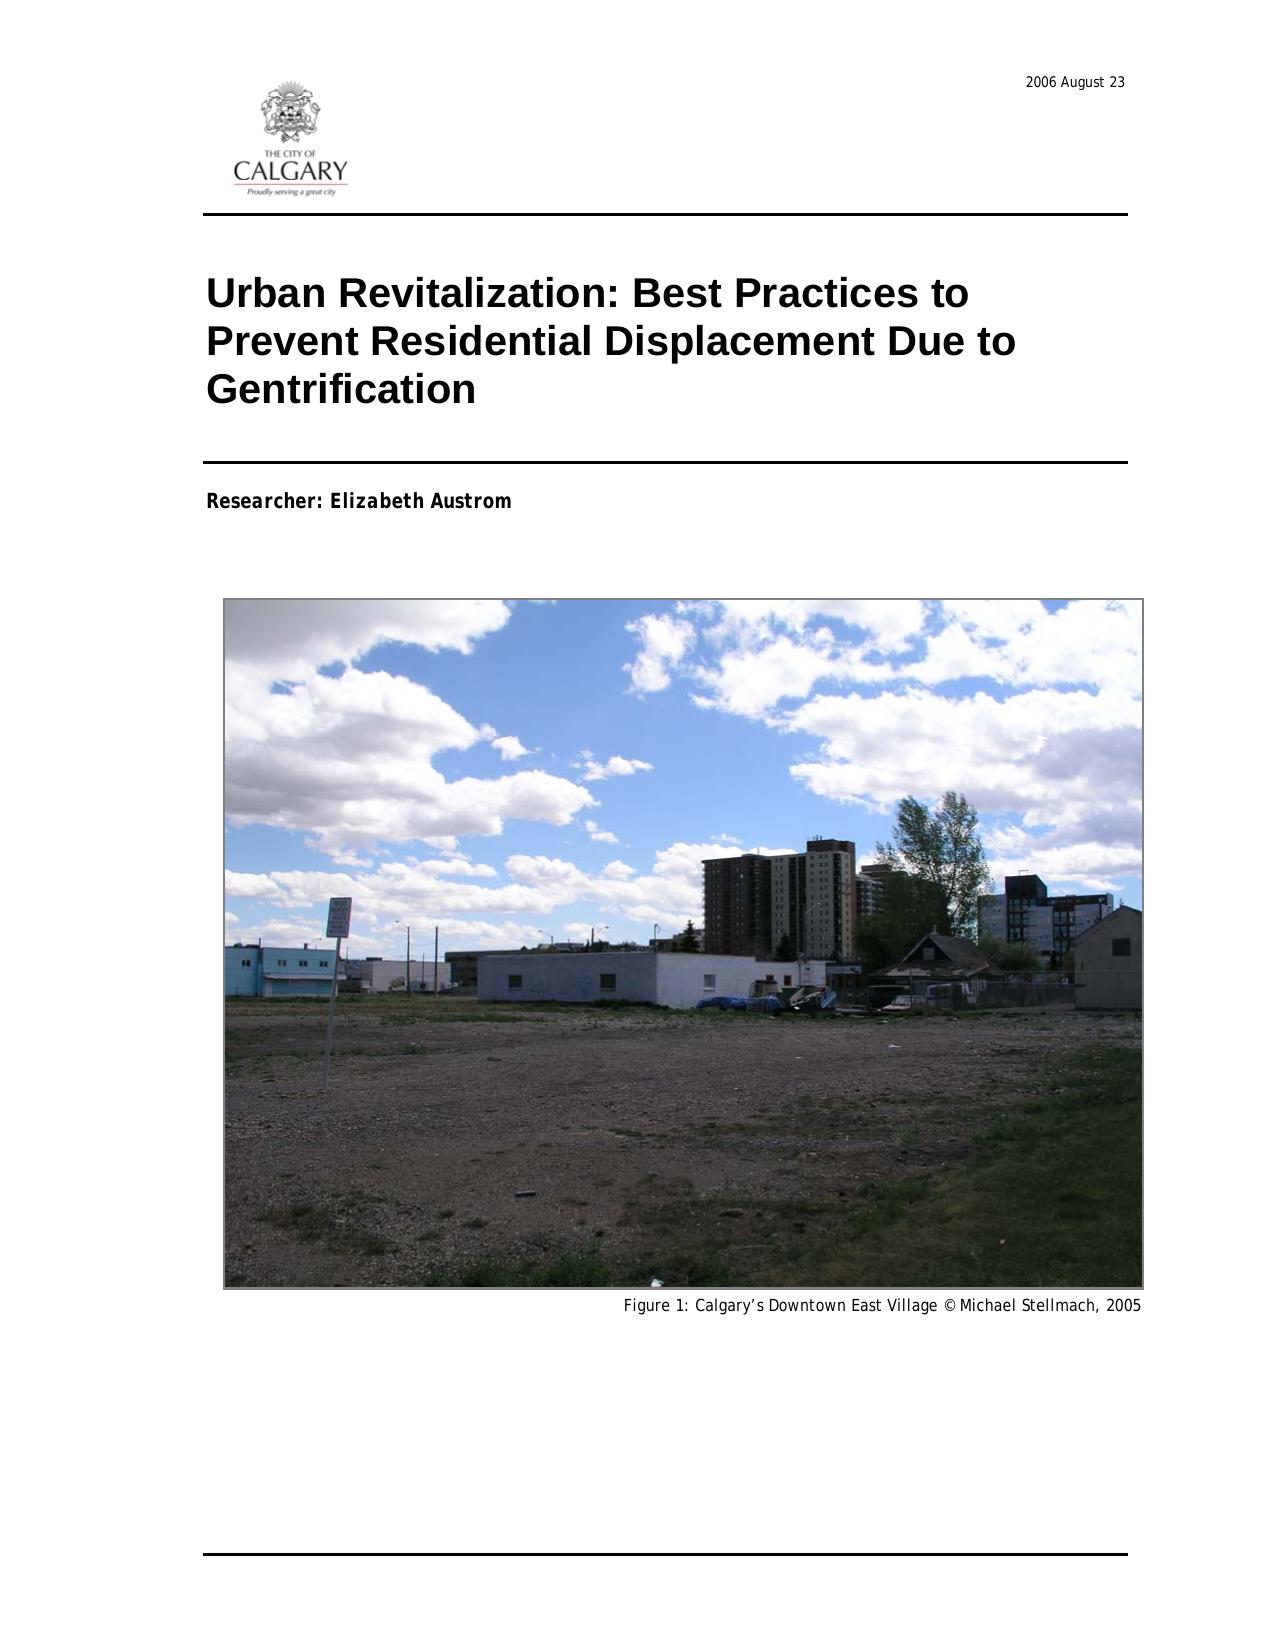 Urban Revitalization: Best Practices to Avoid Displacement